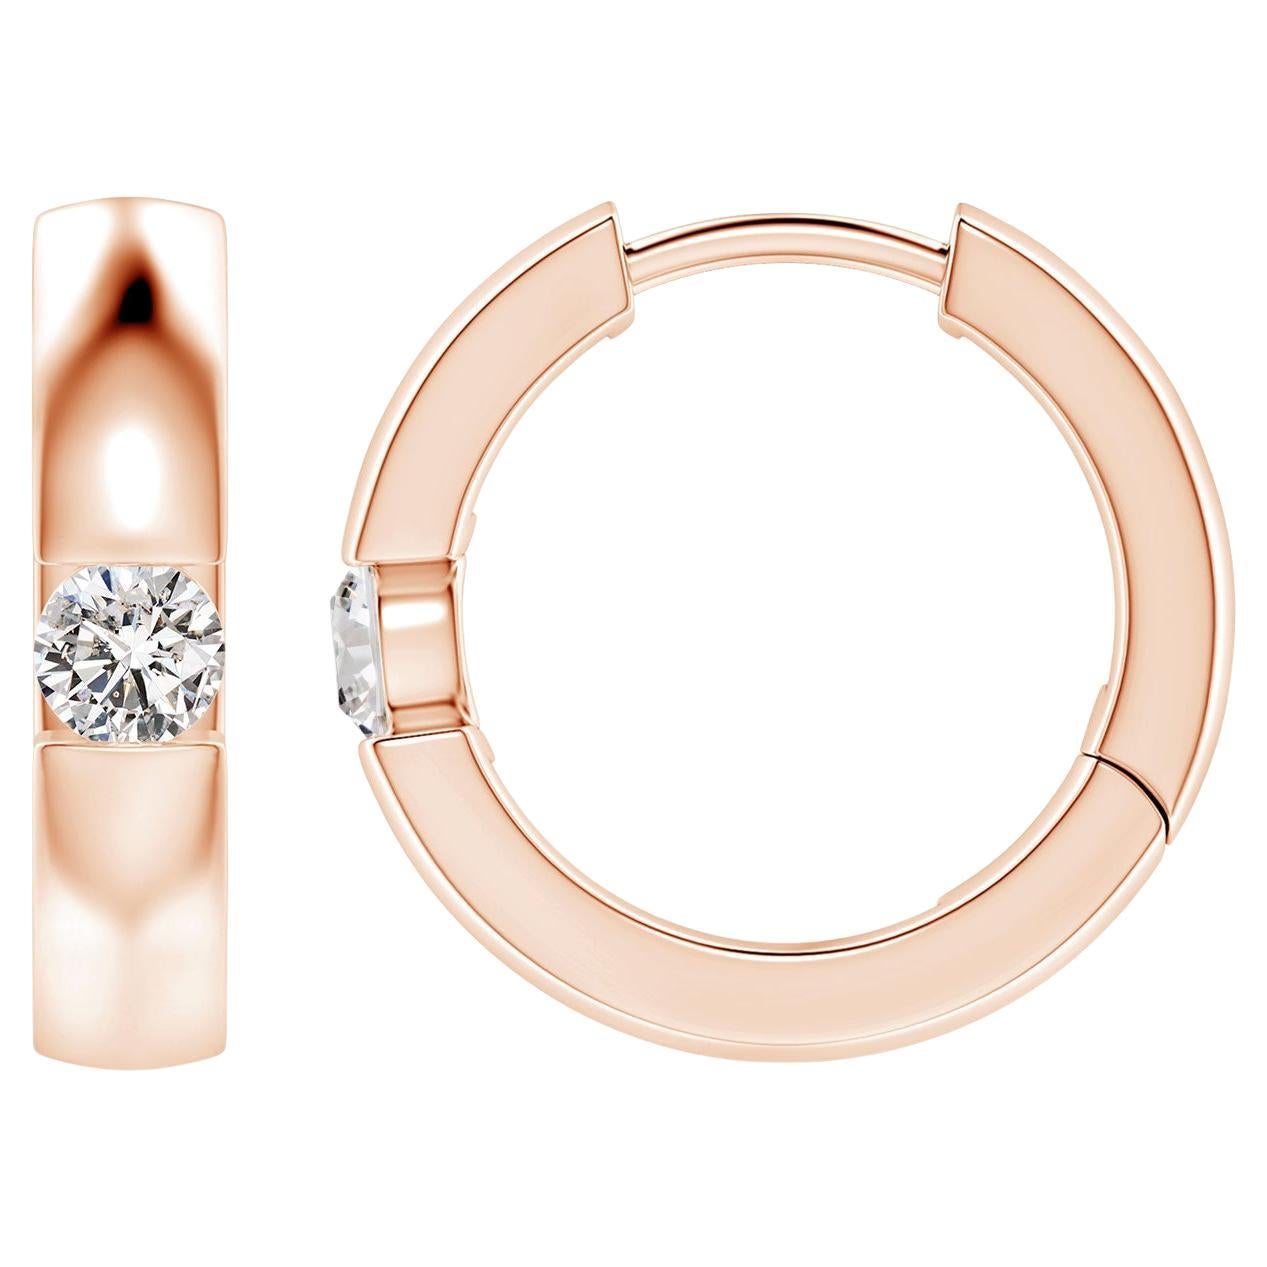 ANGARA Natural Round 0.15ct Diamond Hoop Earrings in 14K Rose Gold (Color-I-J) For Sale